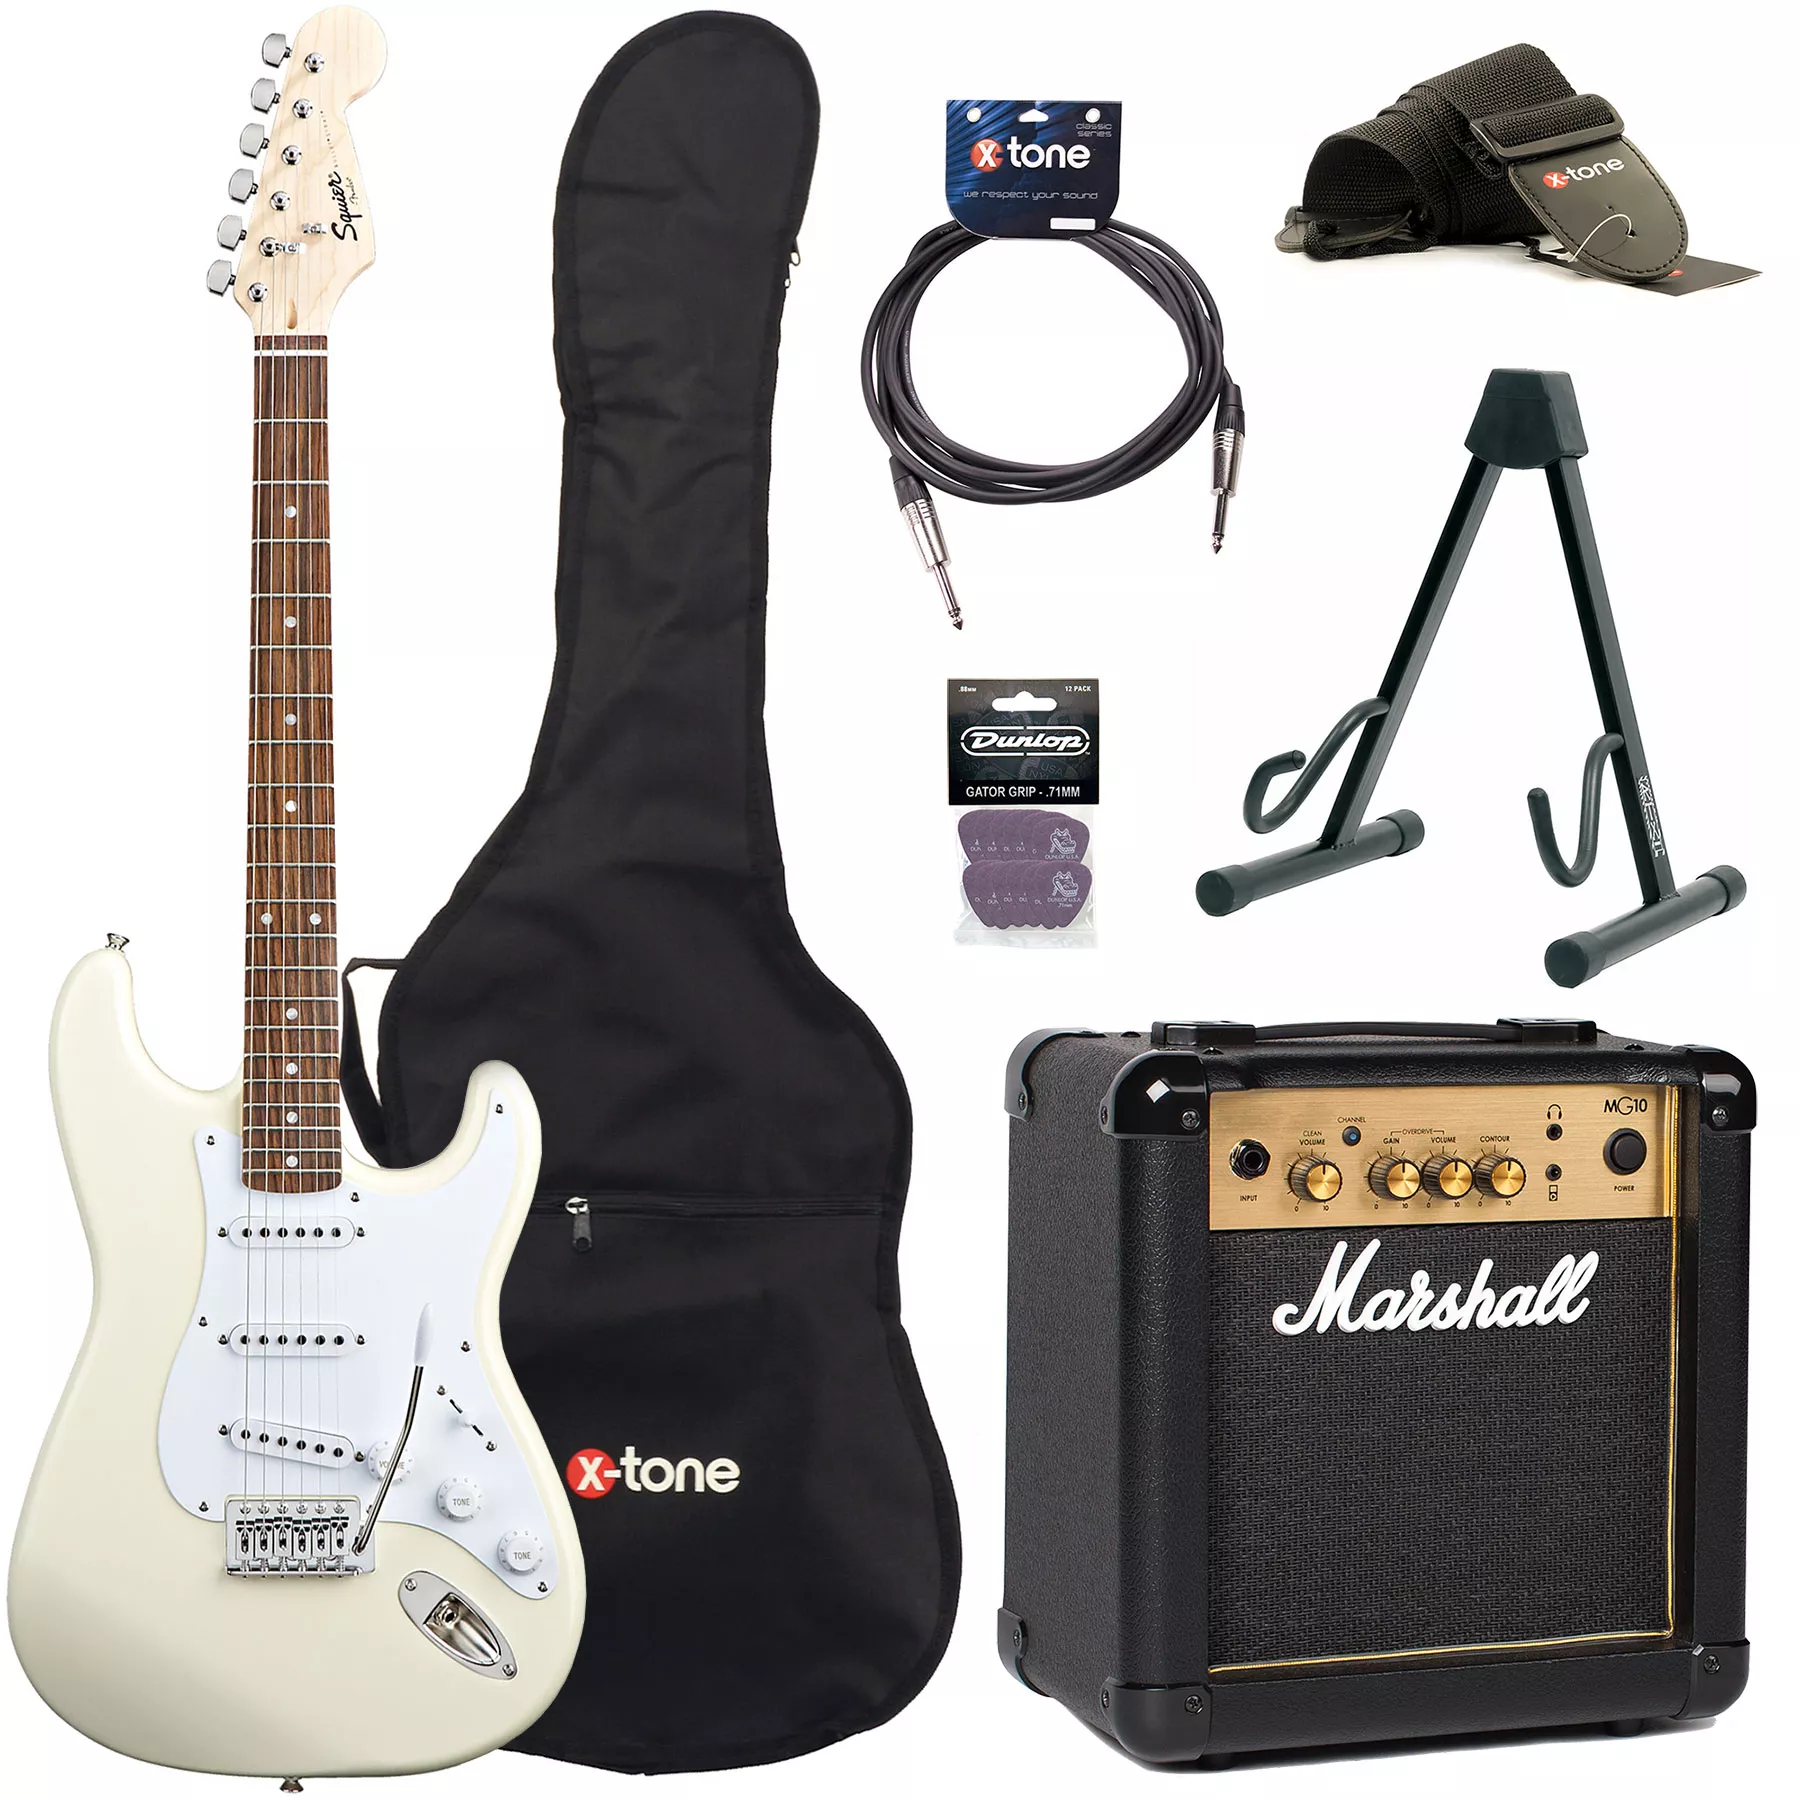 Strat Bullet SSS + Marshall MG10G + access X-Tone - arctic white Pack  guitare électrique Squier